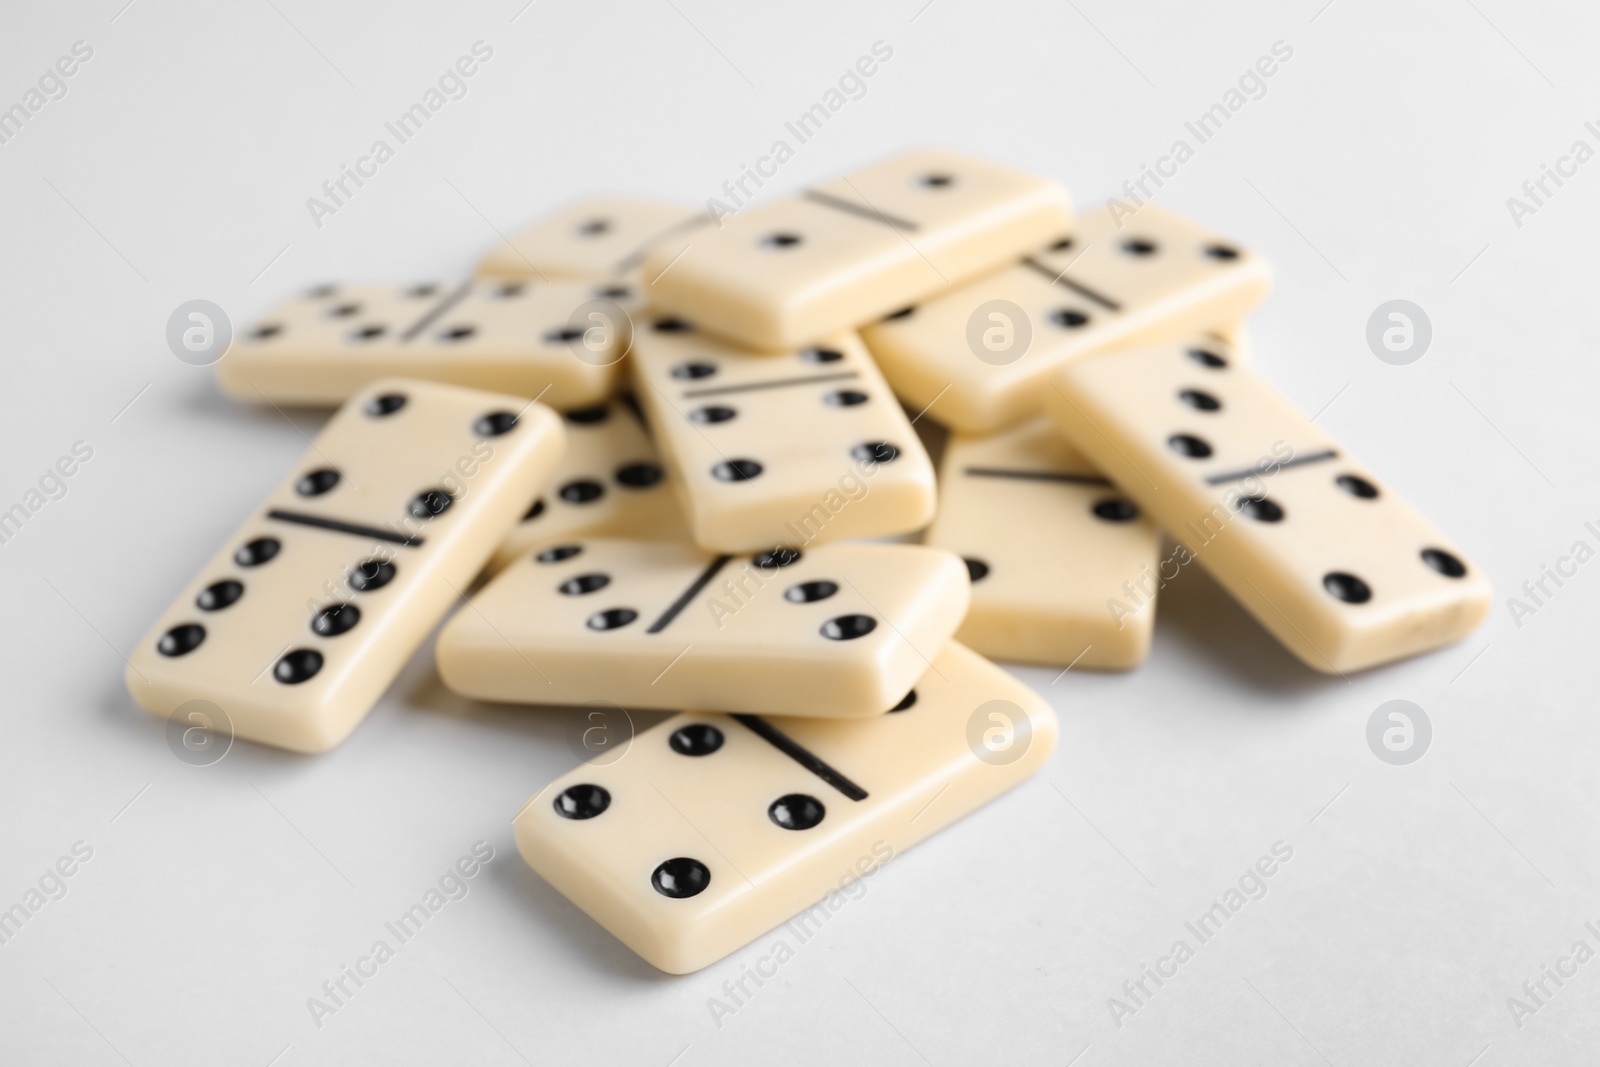 Photo of Pile of domino tiles on white background